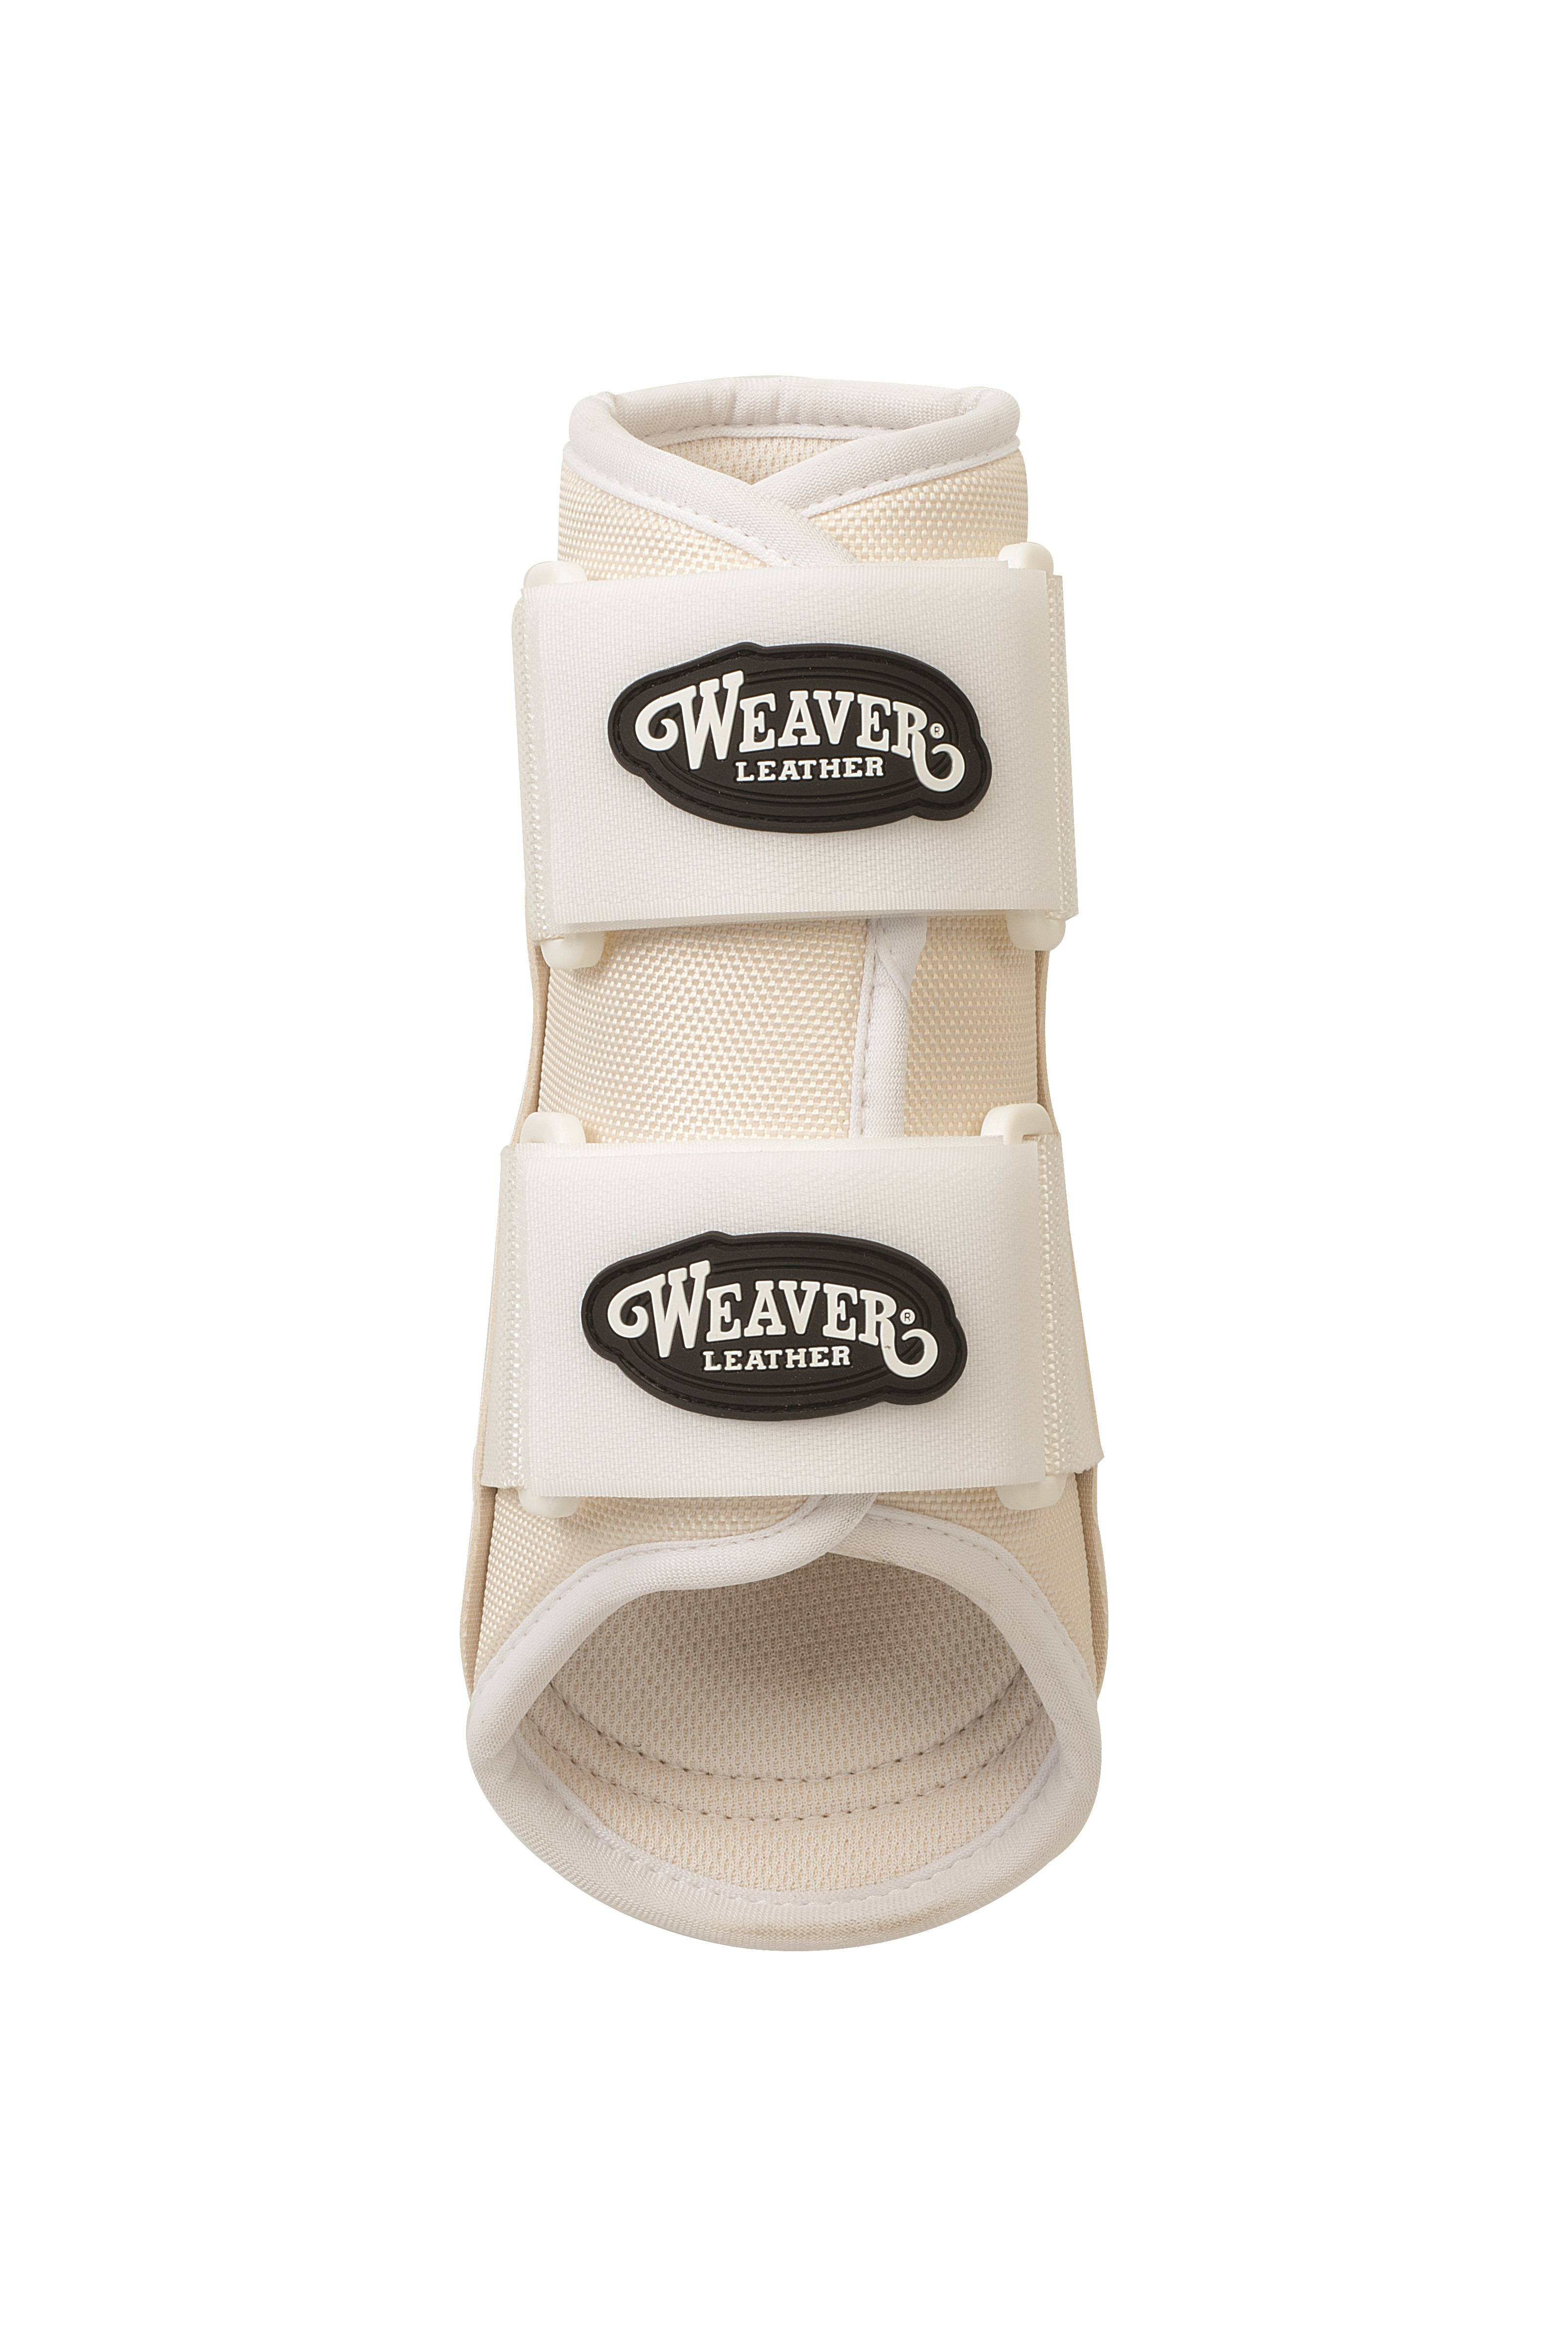 Weaver Leather Splint Boots with Xtended Life Closure System 